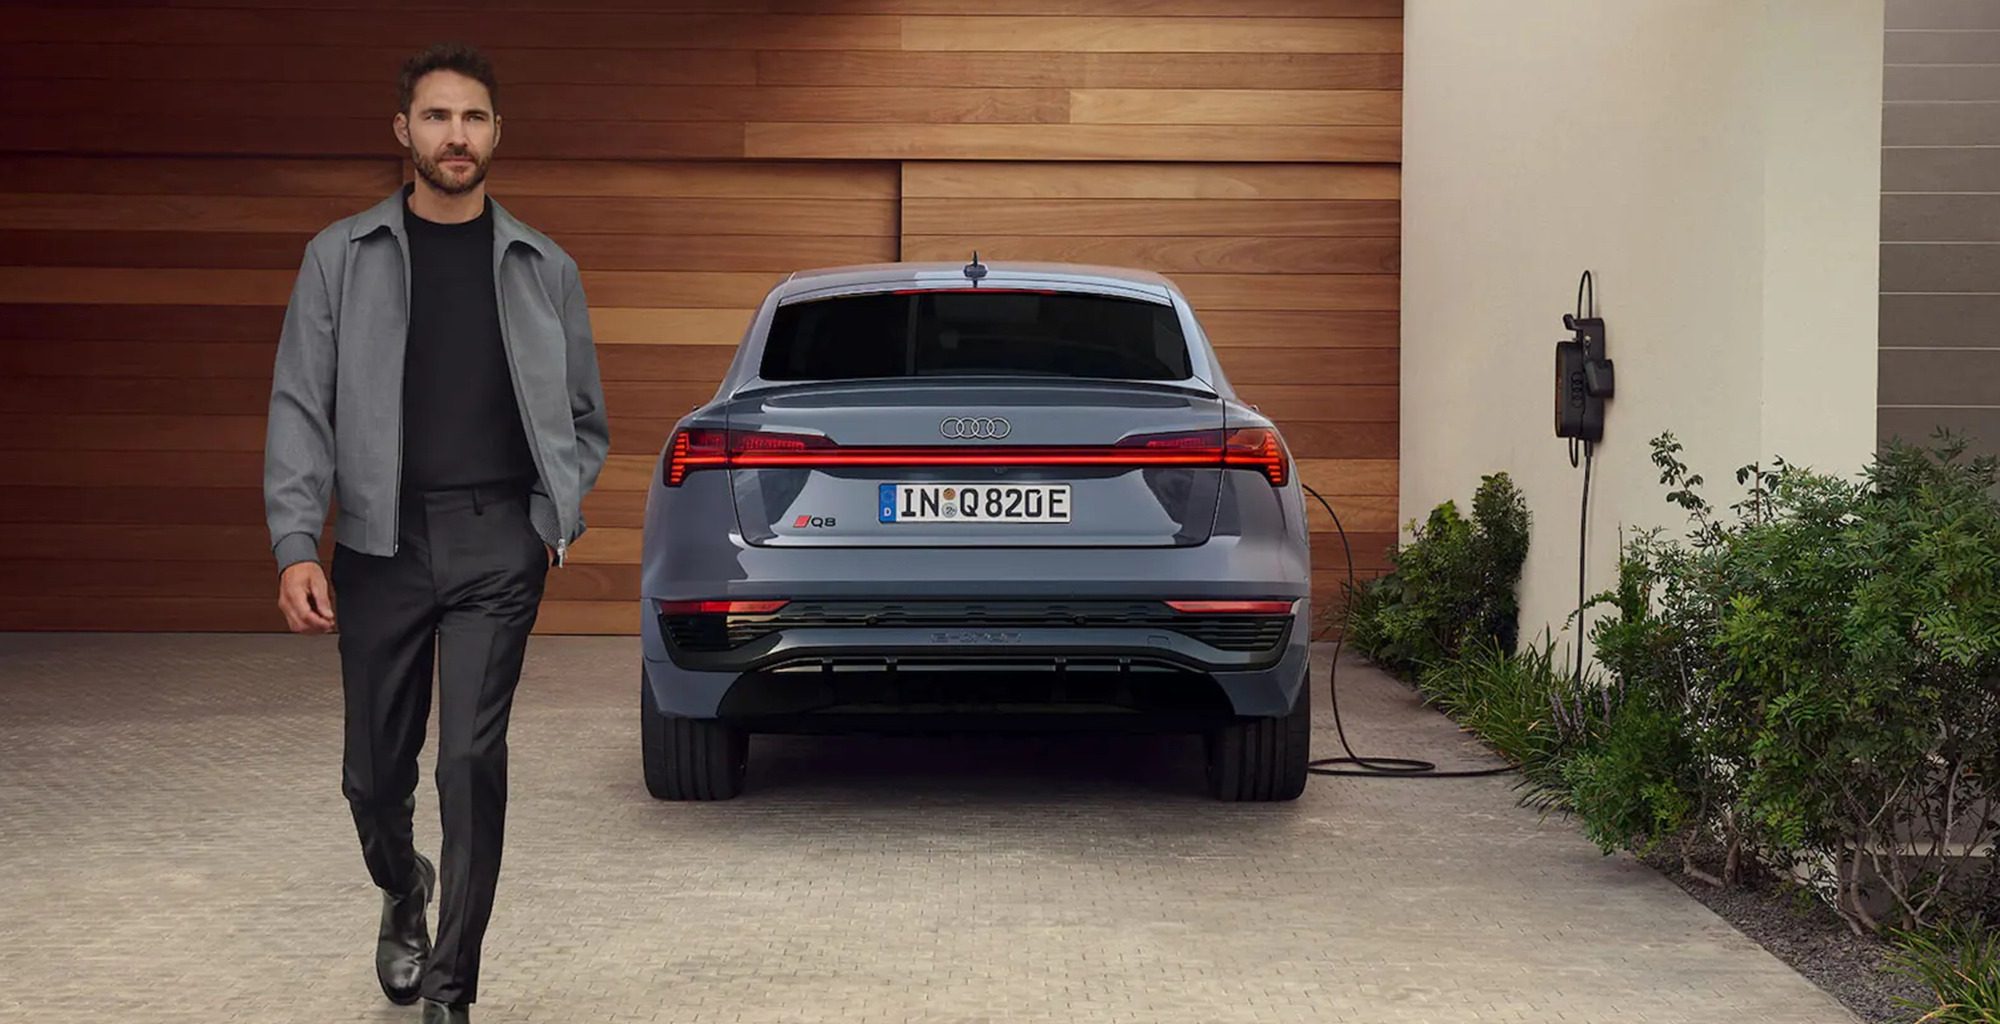 Grey Audi Sq8 e-tron parked in drive way plugged in to a charger with a man in casual clothes to the left